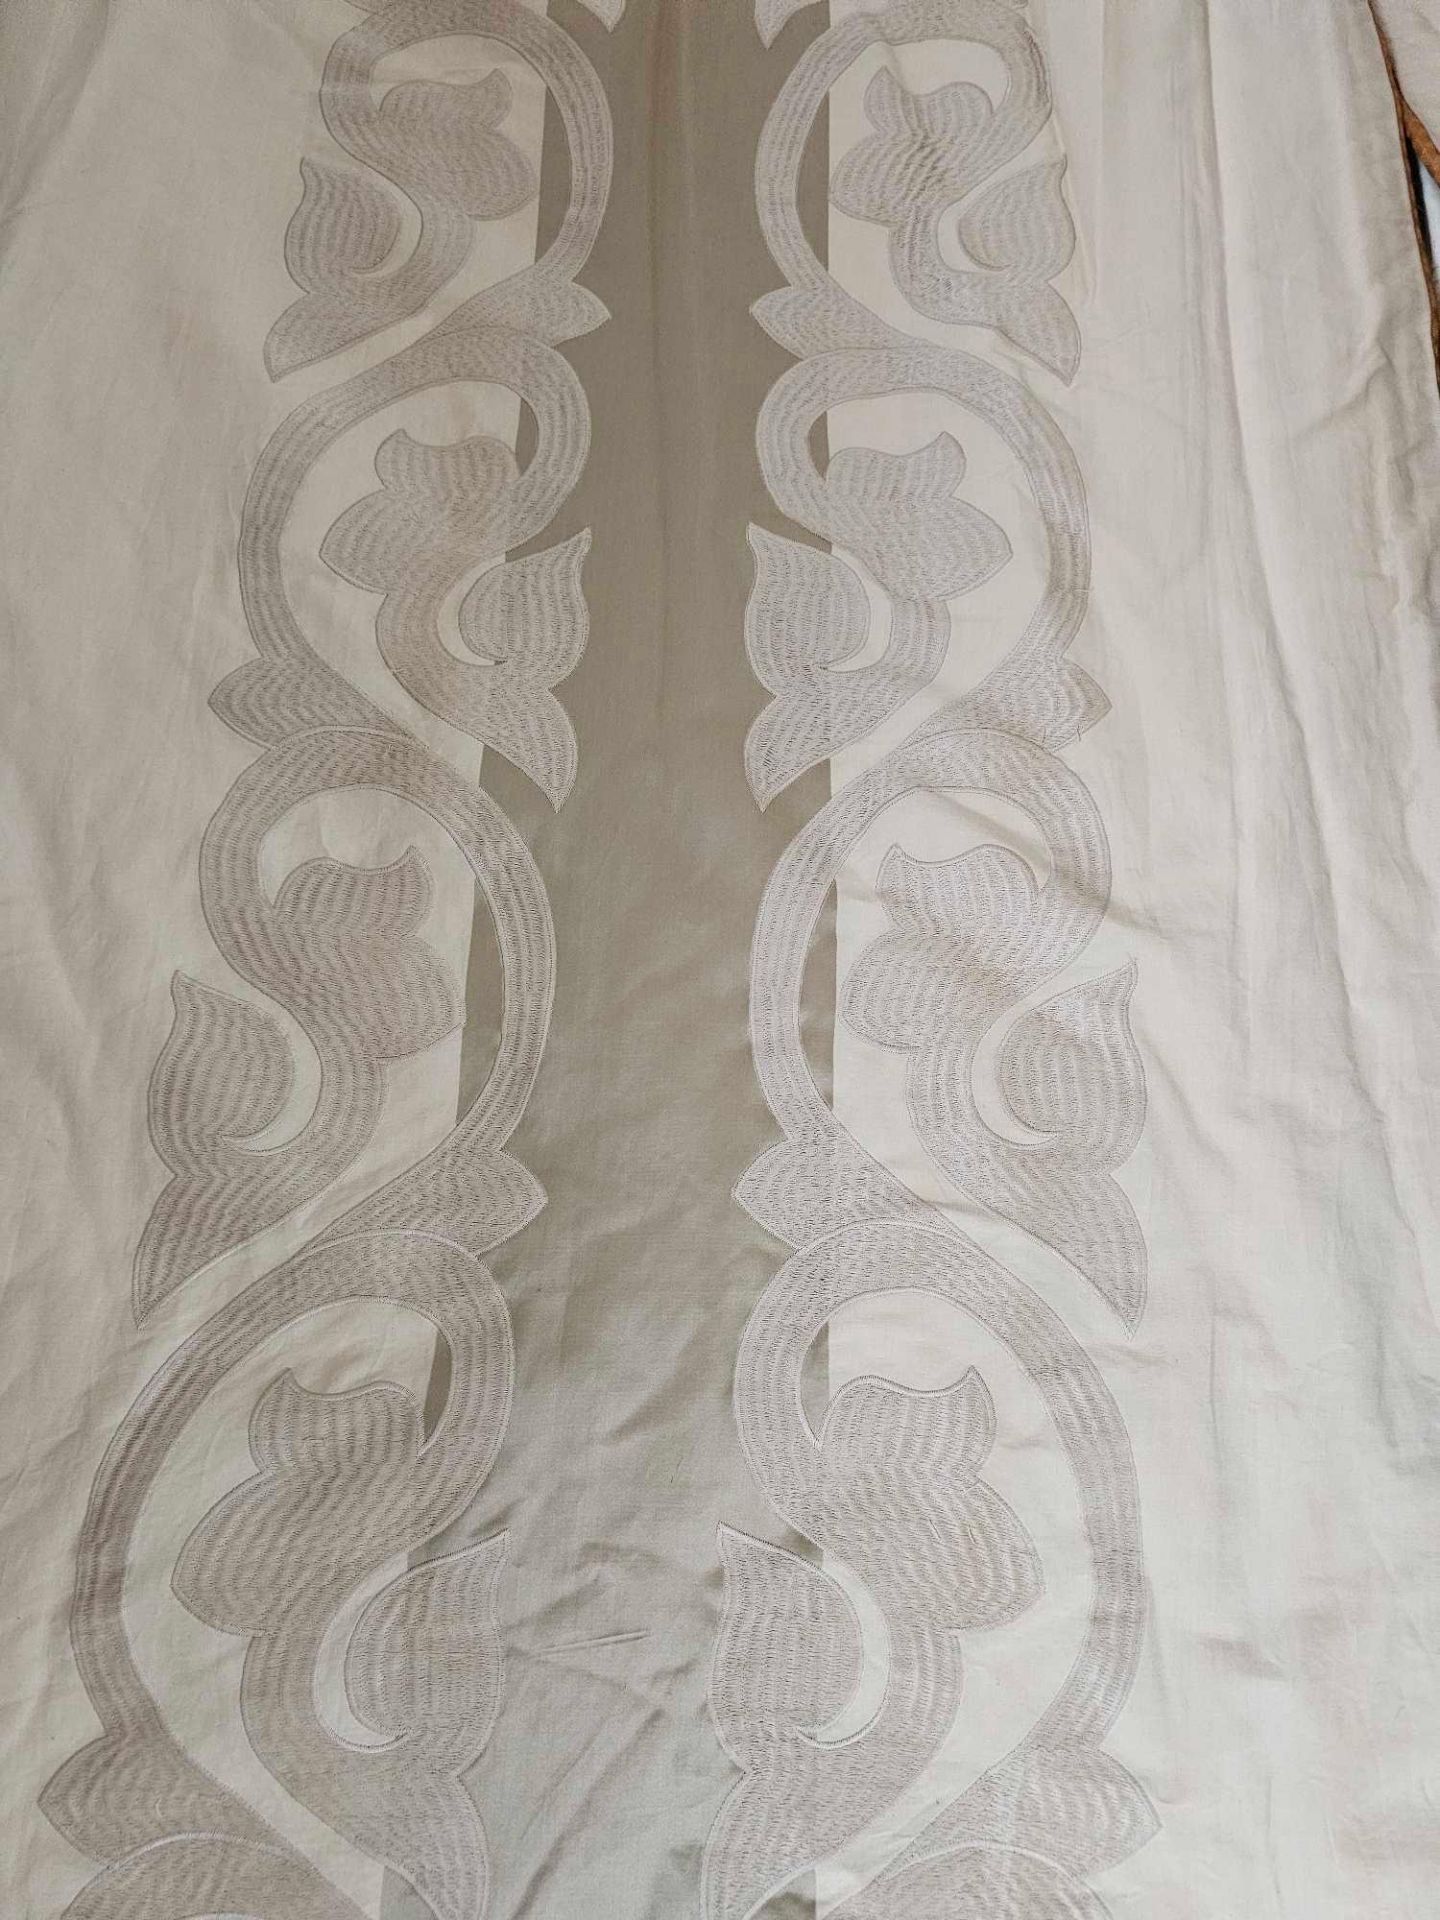 A Pair Of Silk Bed Canopy Drapes Brown Pattern Repeating With Piping Each Panel 60cm Wide X 218cm - Image 2 of 2